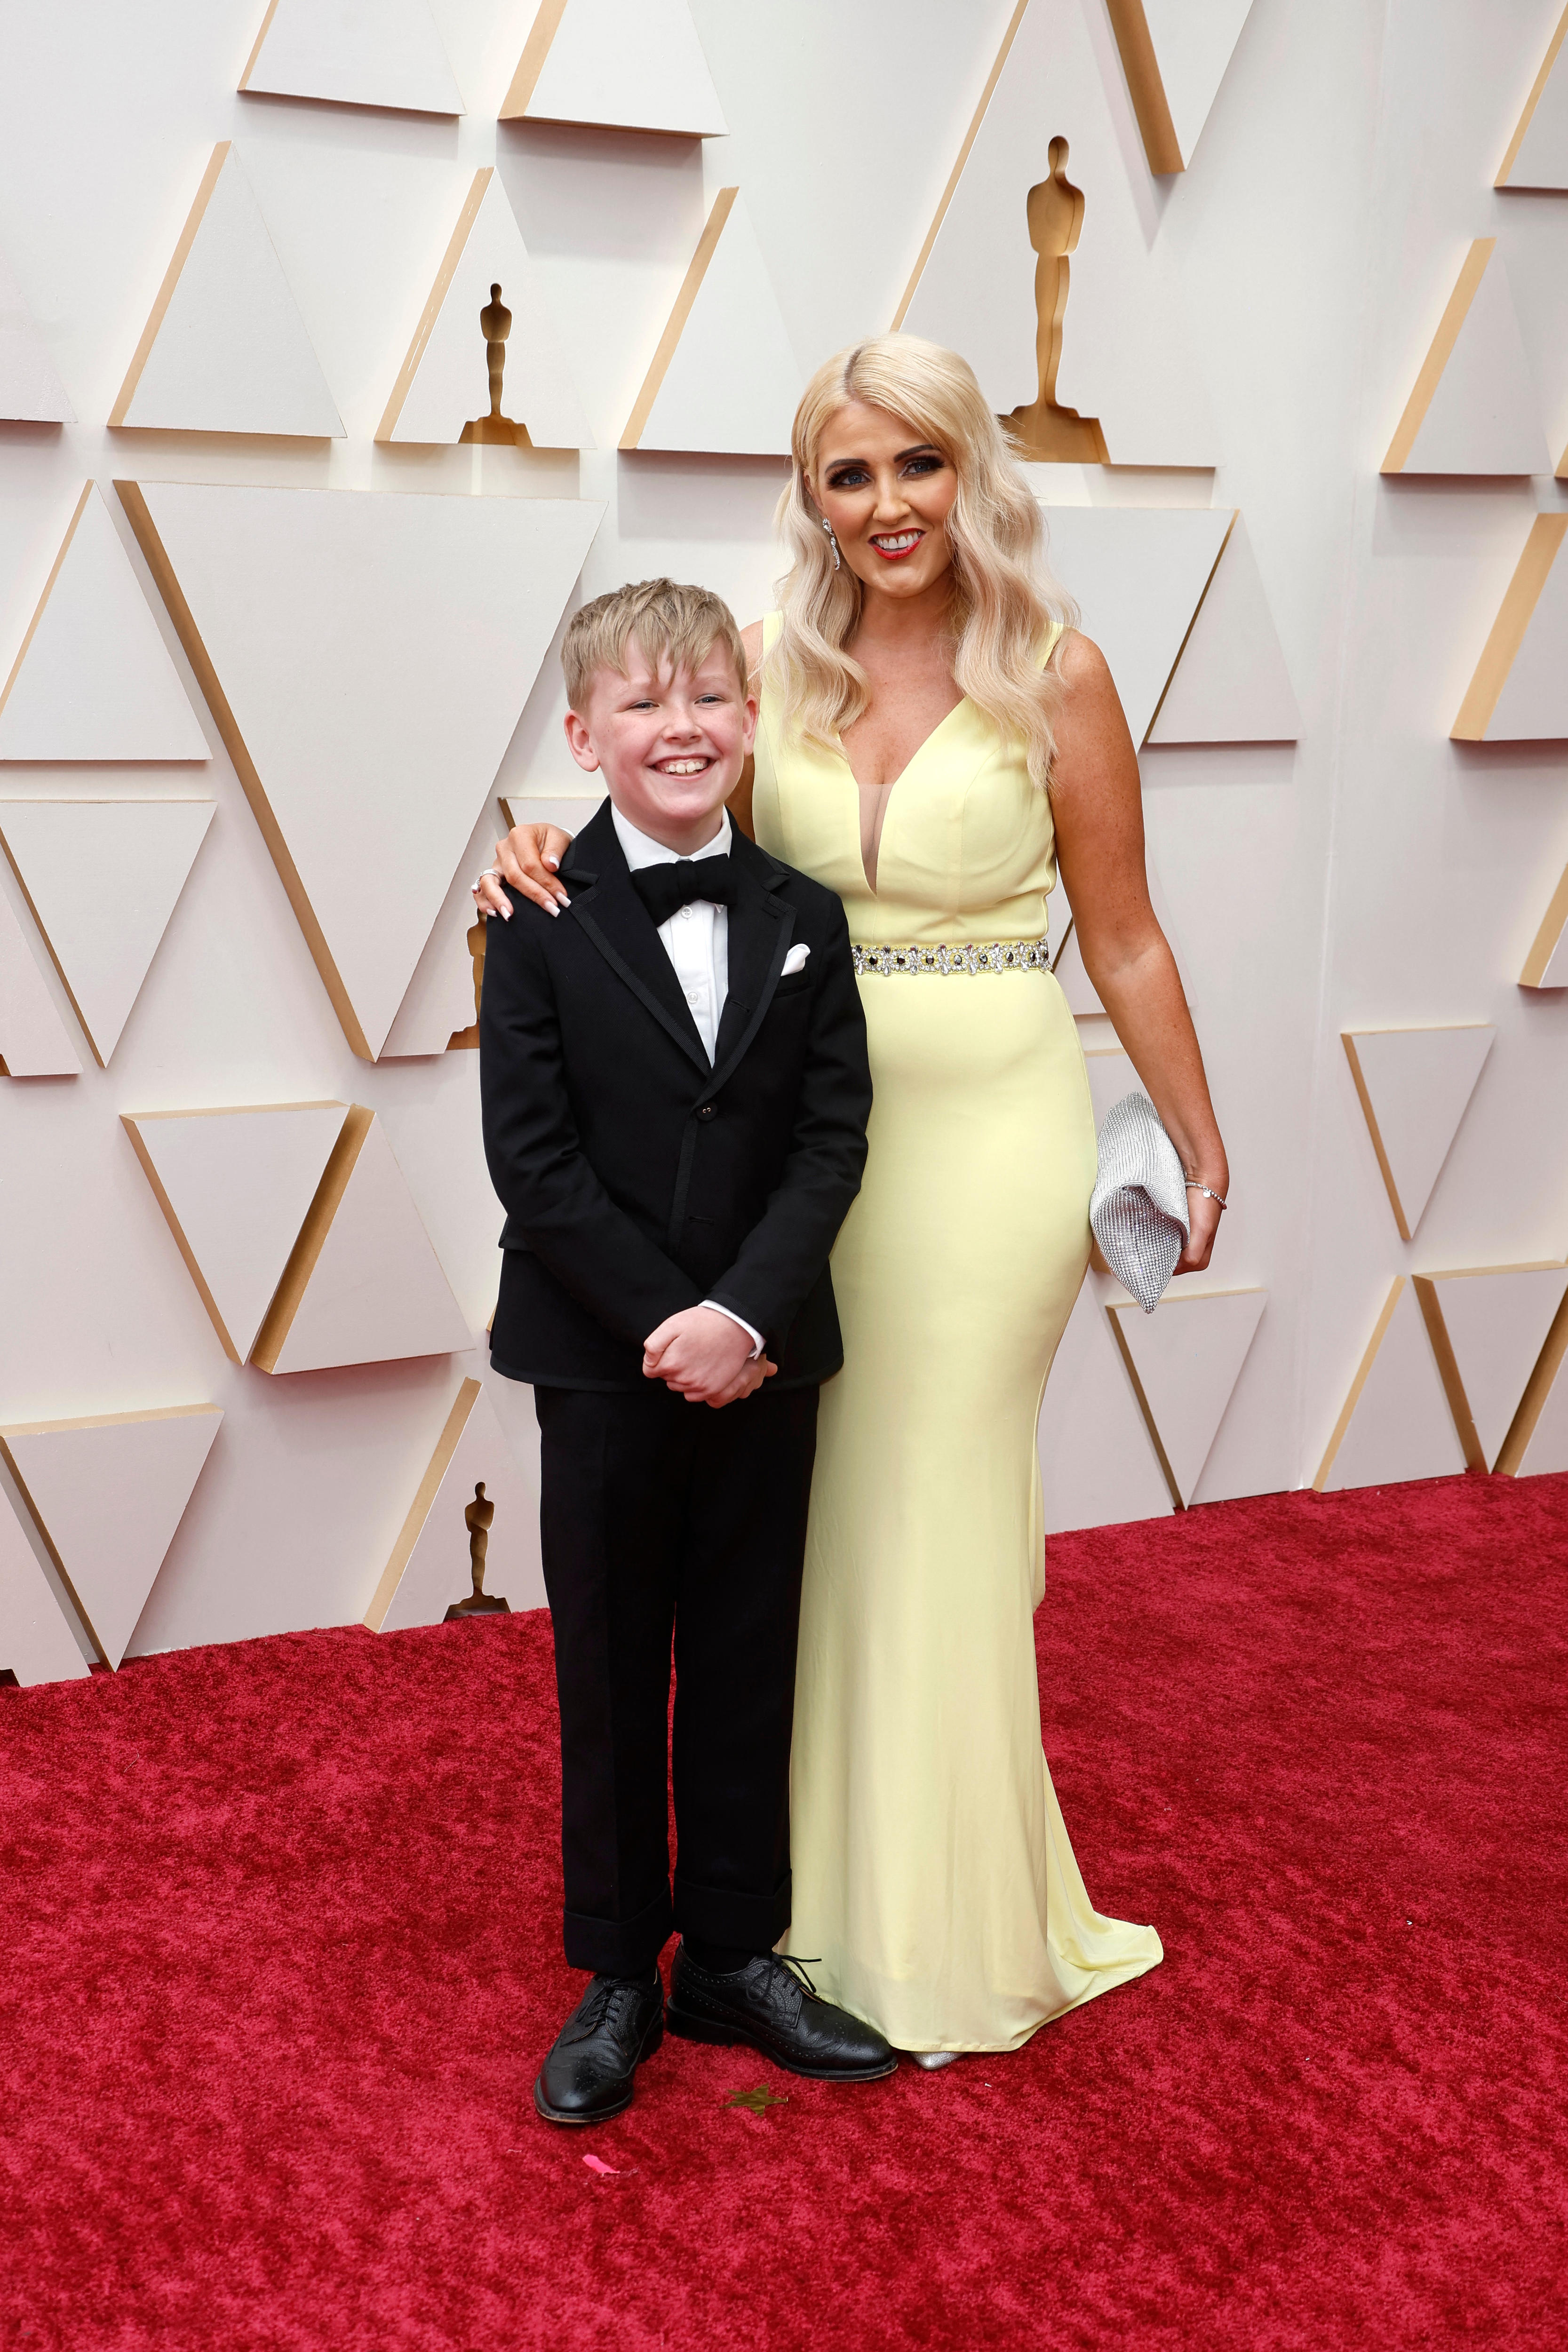 11 year old actor jude hill poses on a red carpet with his mother who is wearing a long pale yellow gown